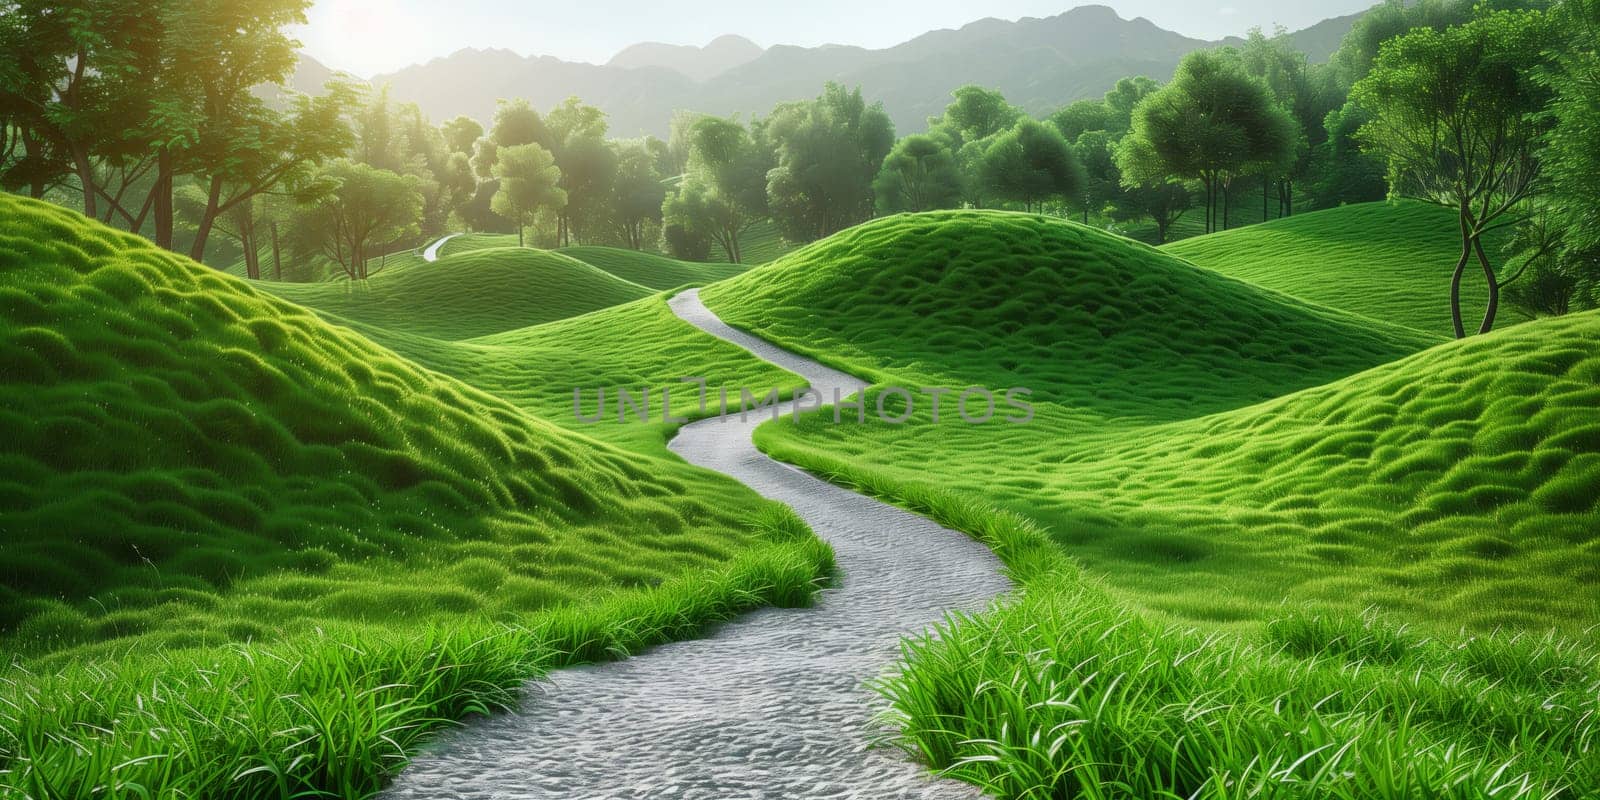 A path winds through a green field with mountains in the background by richwolf